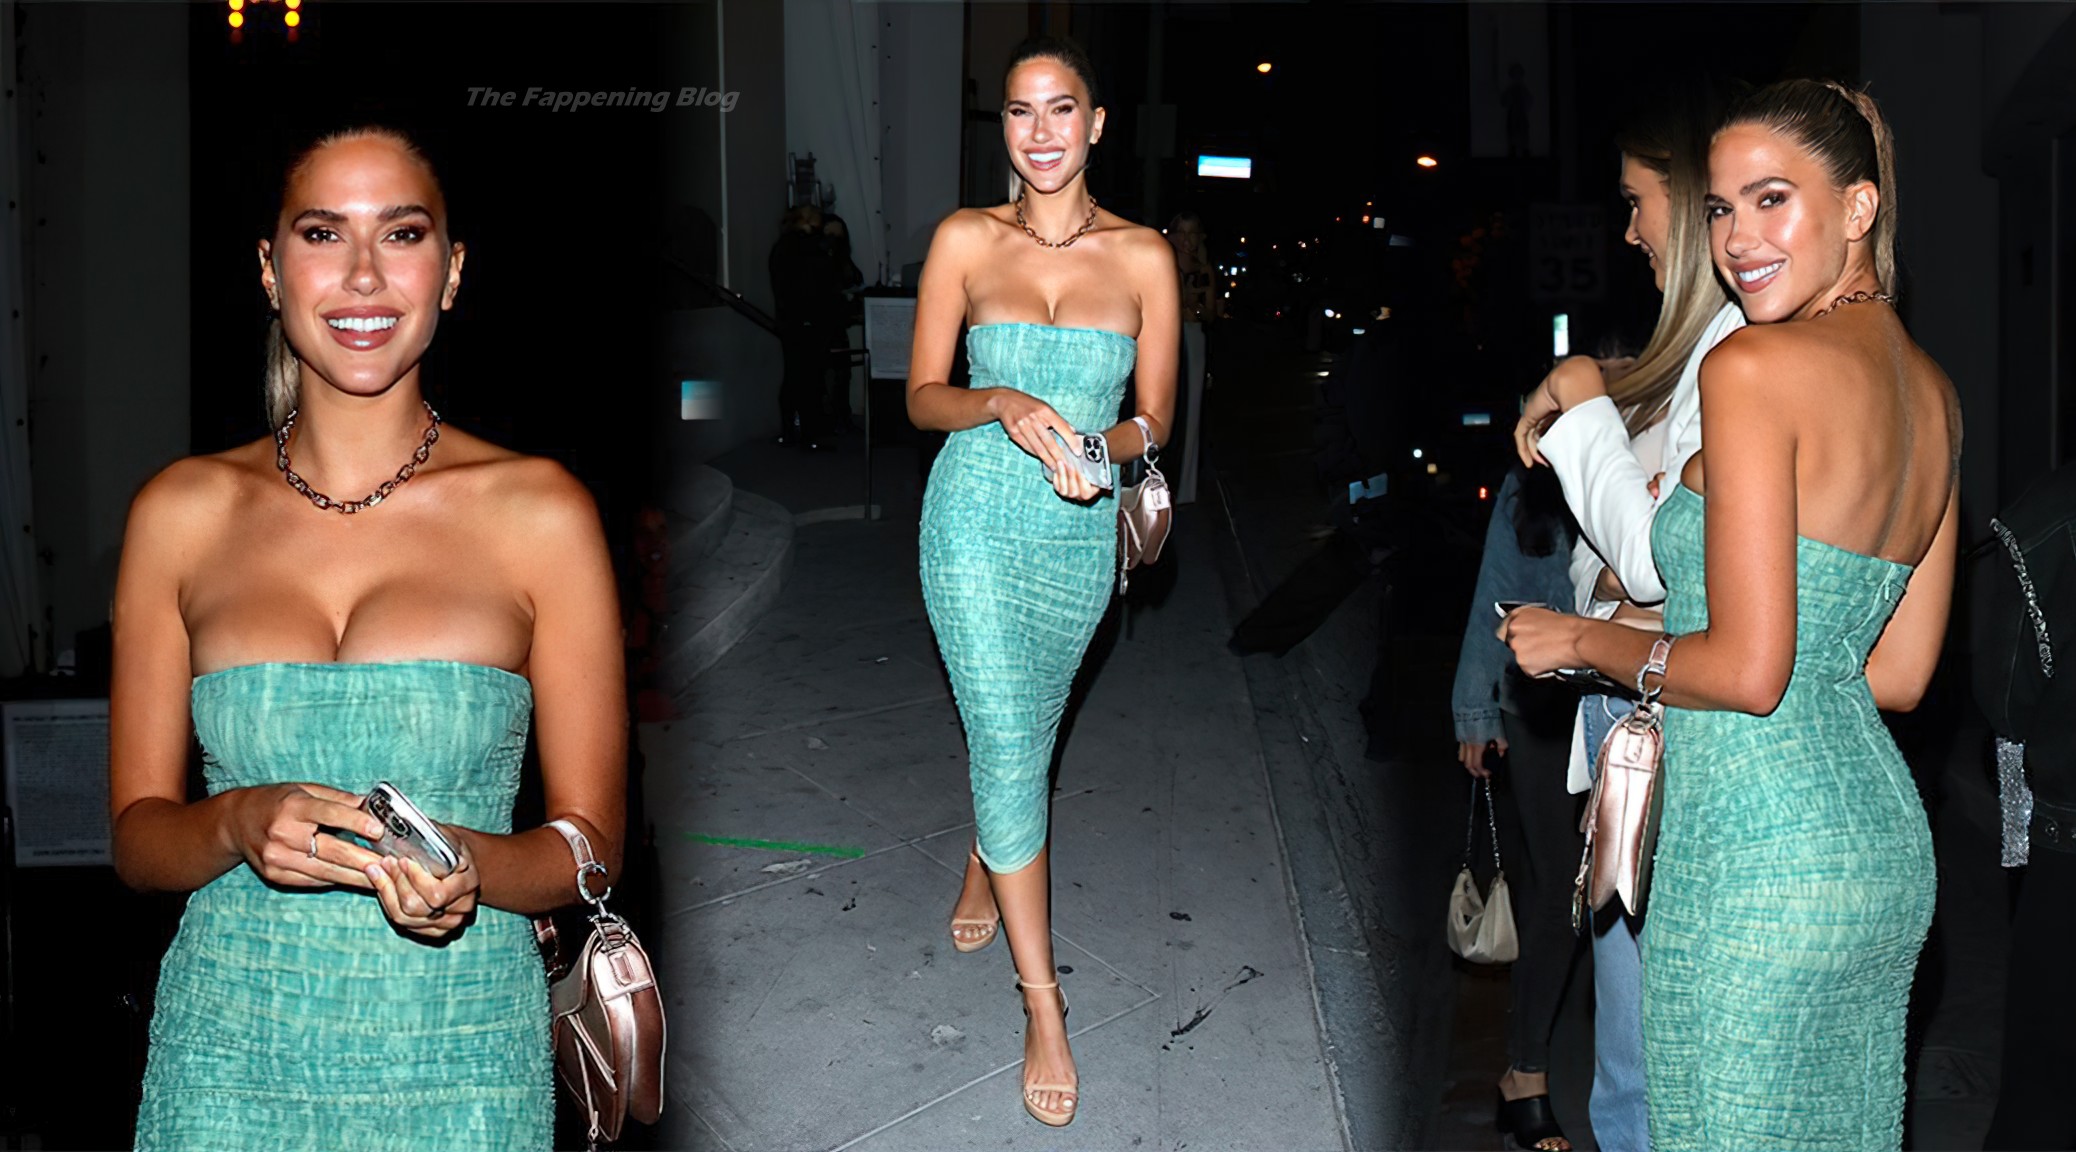 Kara Del Toro is Seen in a Form-Fitting Strapless Dress at Catch LA (42 Photos + Video)